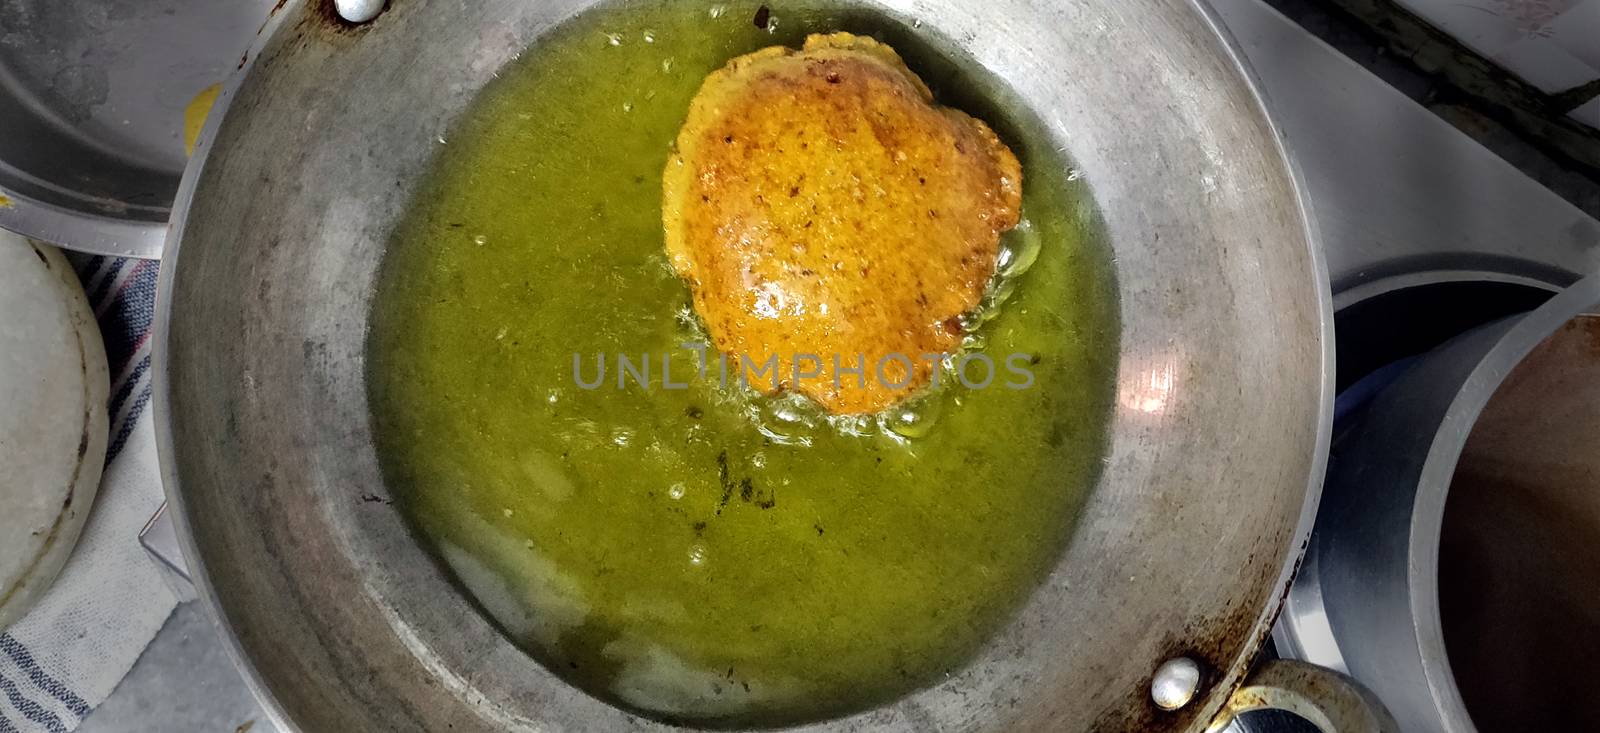 Deep fried Indian bread called Puri in a cooking pan with vegetable oil